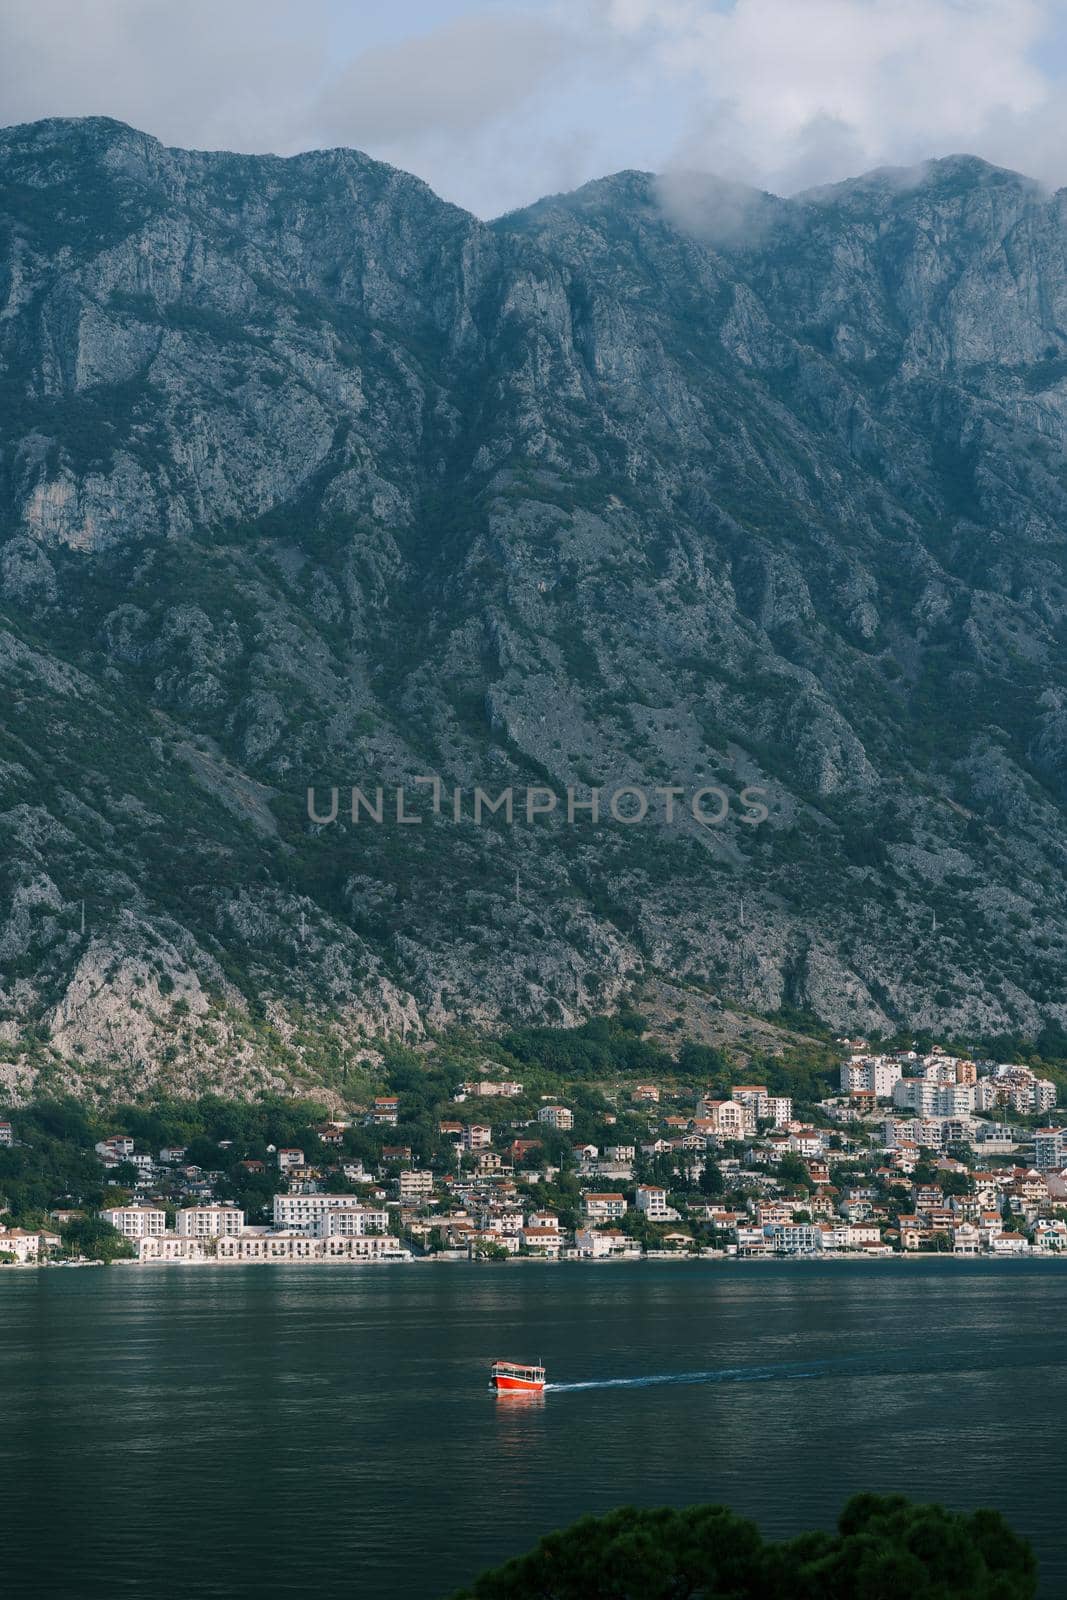 Boat sails along the bay against the backdrop of the old town at the foot of the mountains. High quality photo